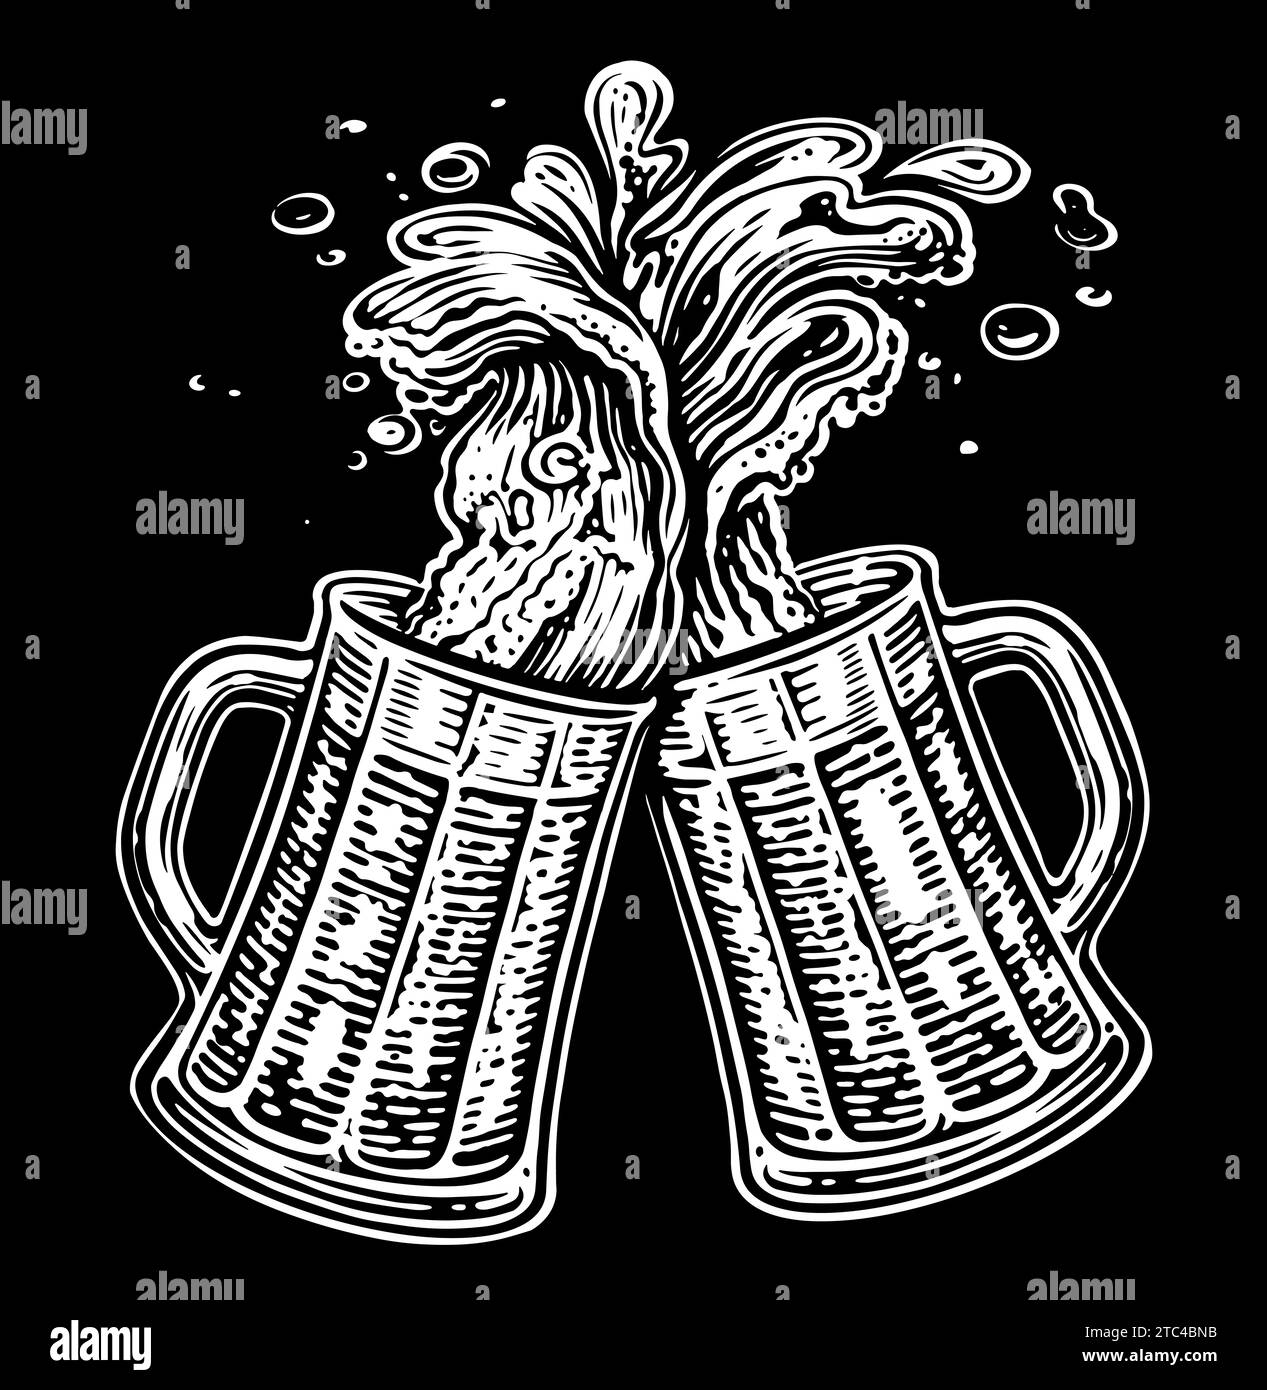 Two toasting mugs for brewery, pub, bar. Clinking glass tankards full of beer and splashed foam Stock Photo